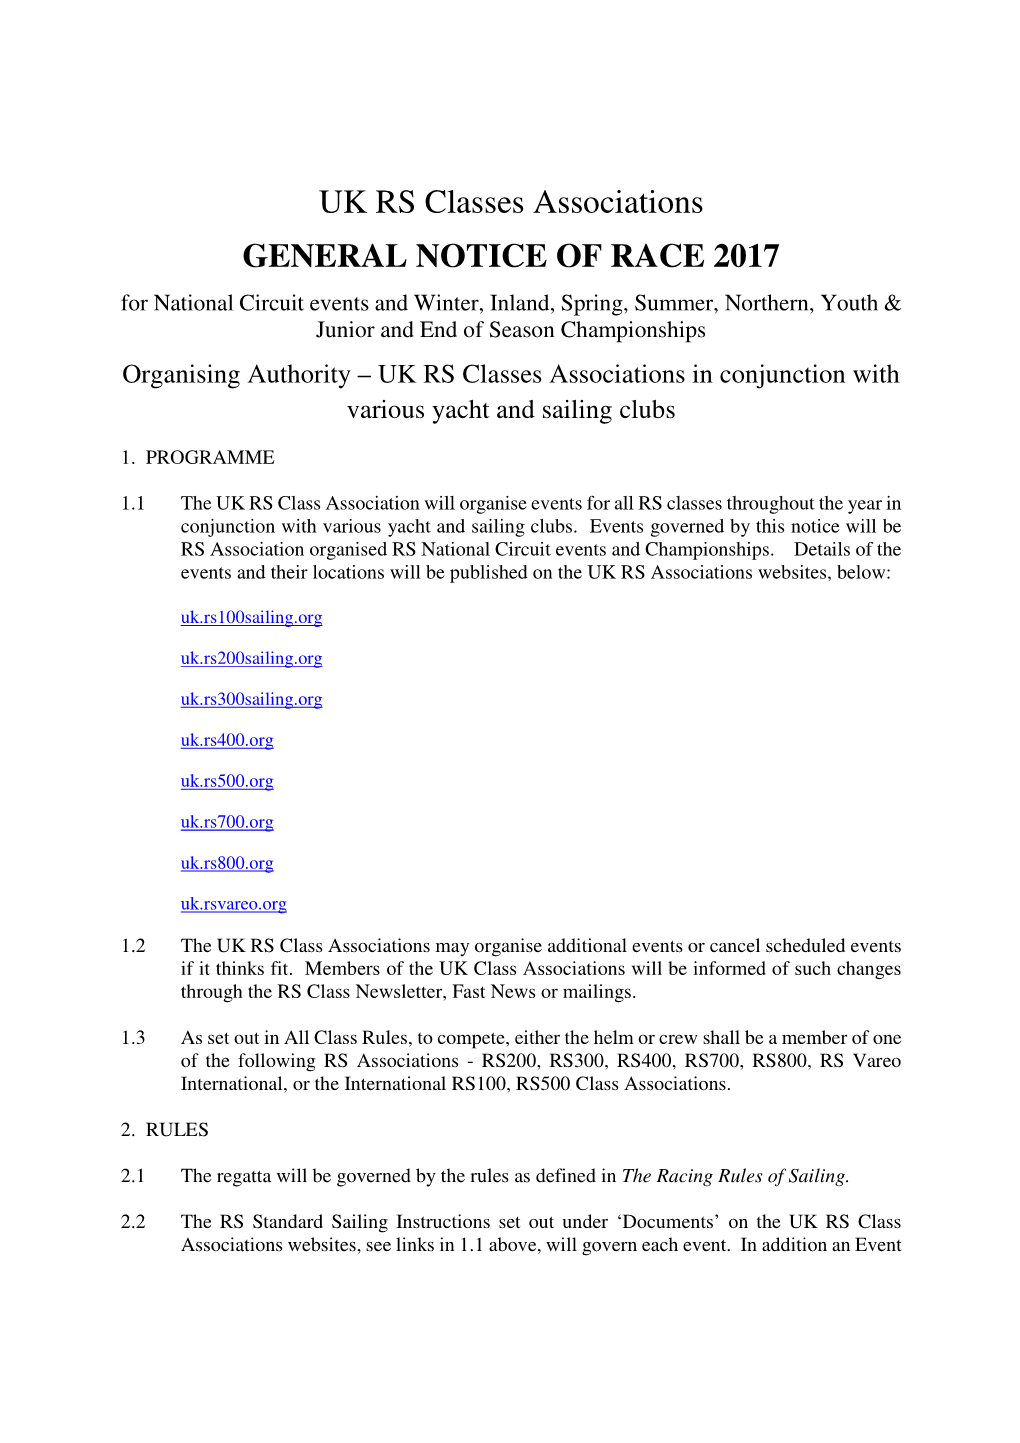 UK RS Classes Associations GENERAL NOTICE of RACE 2017